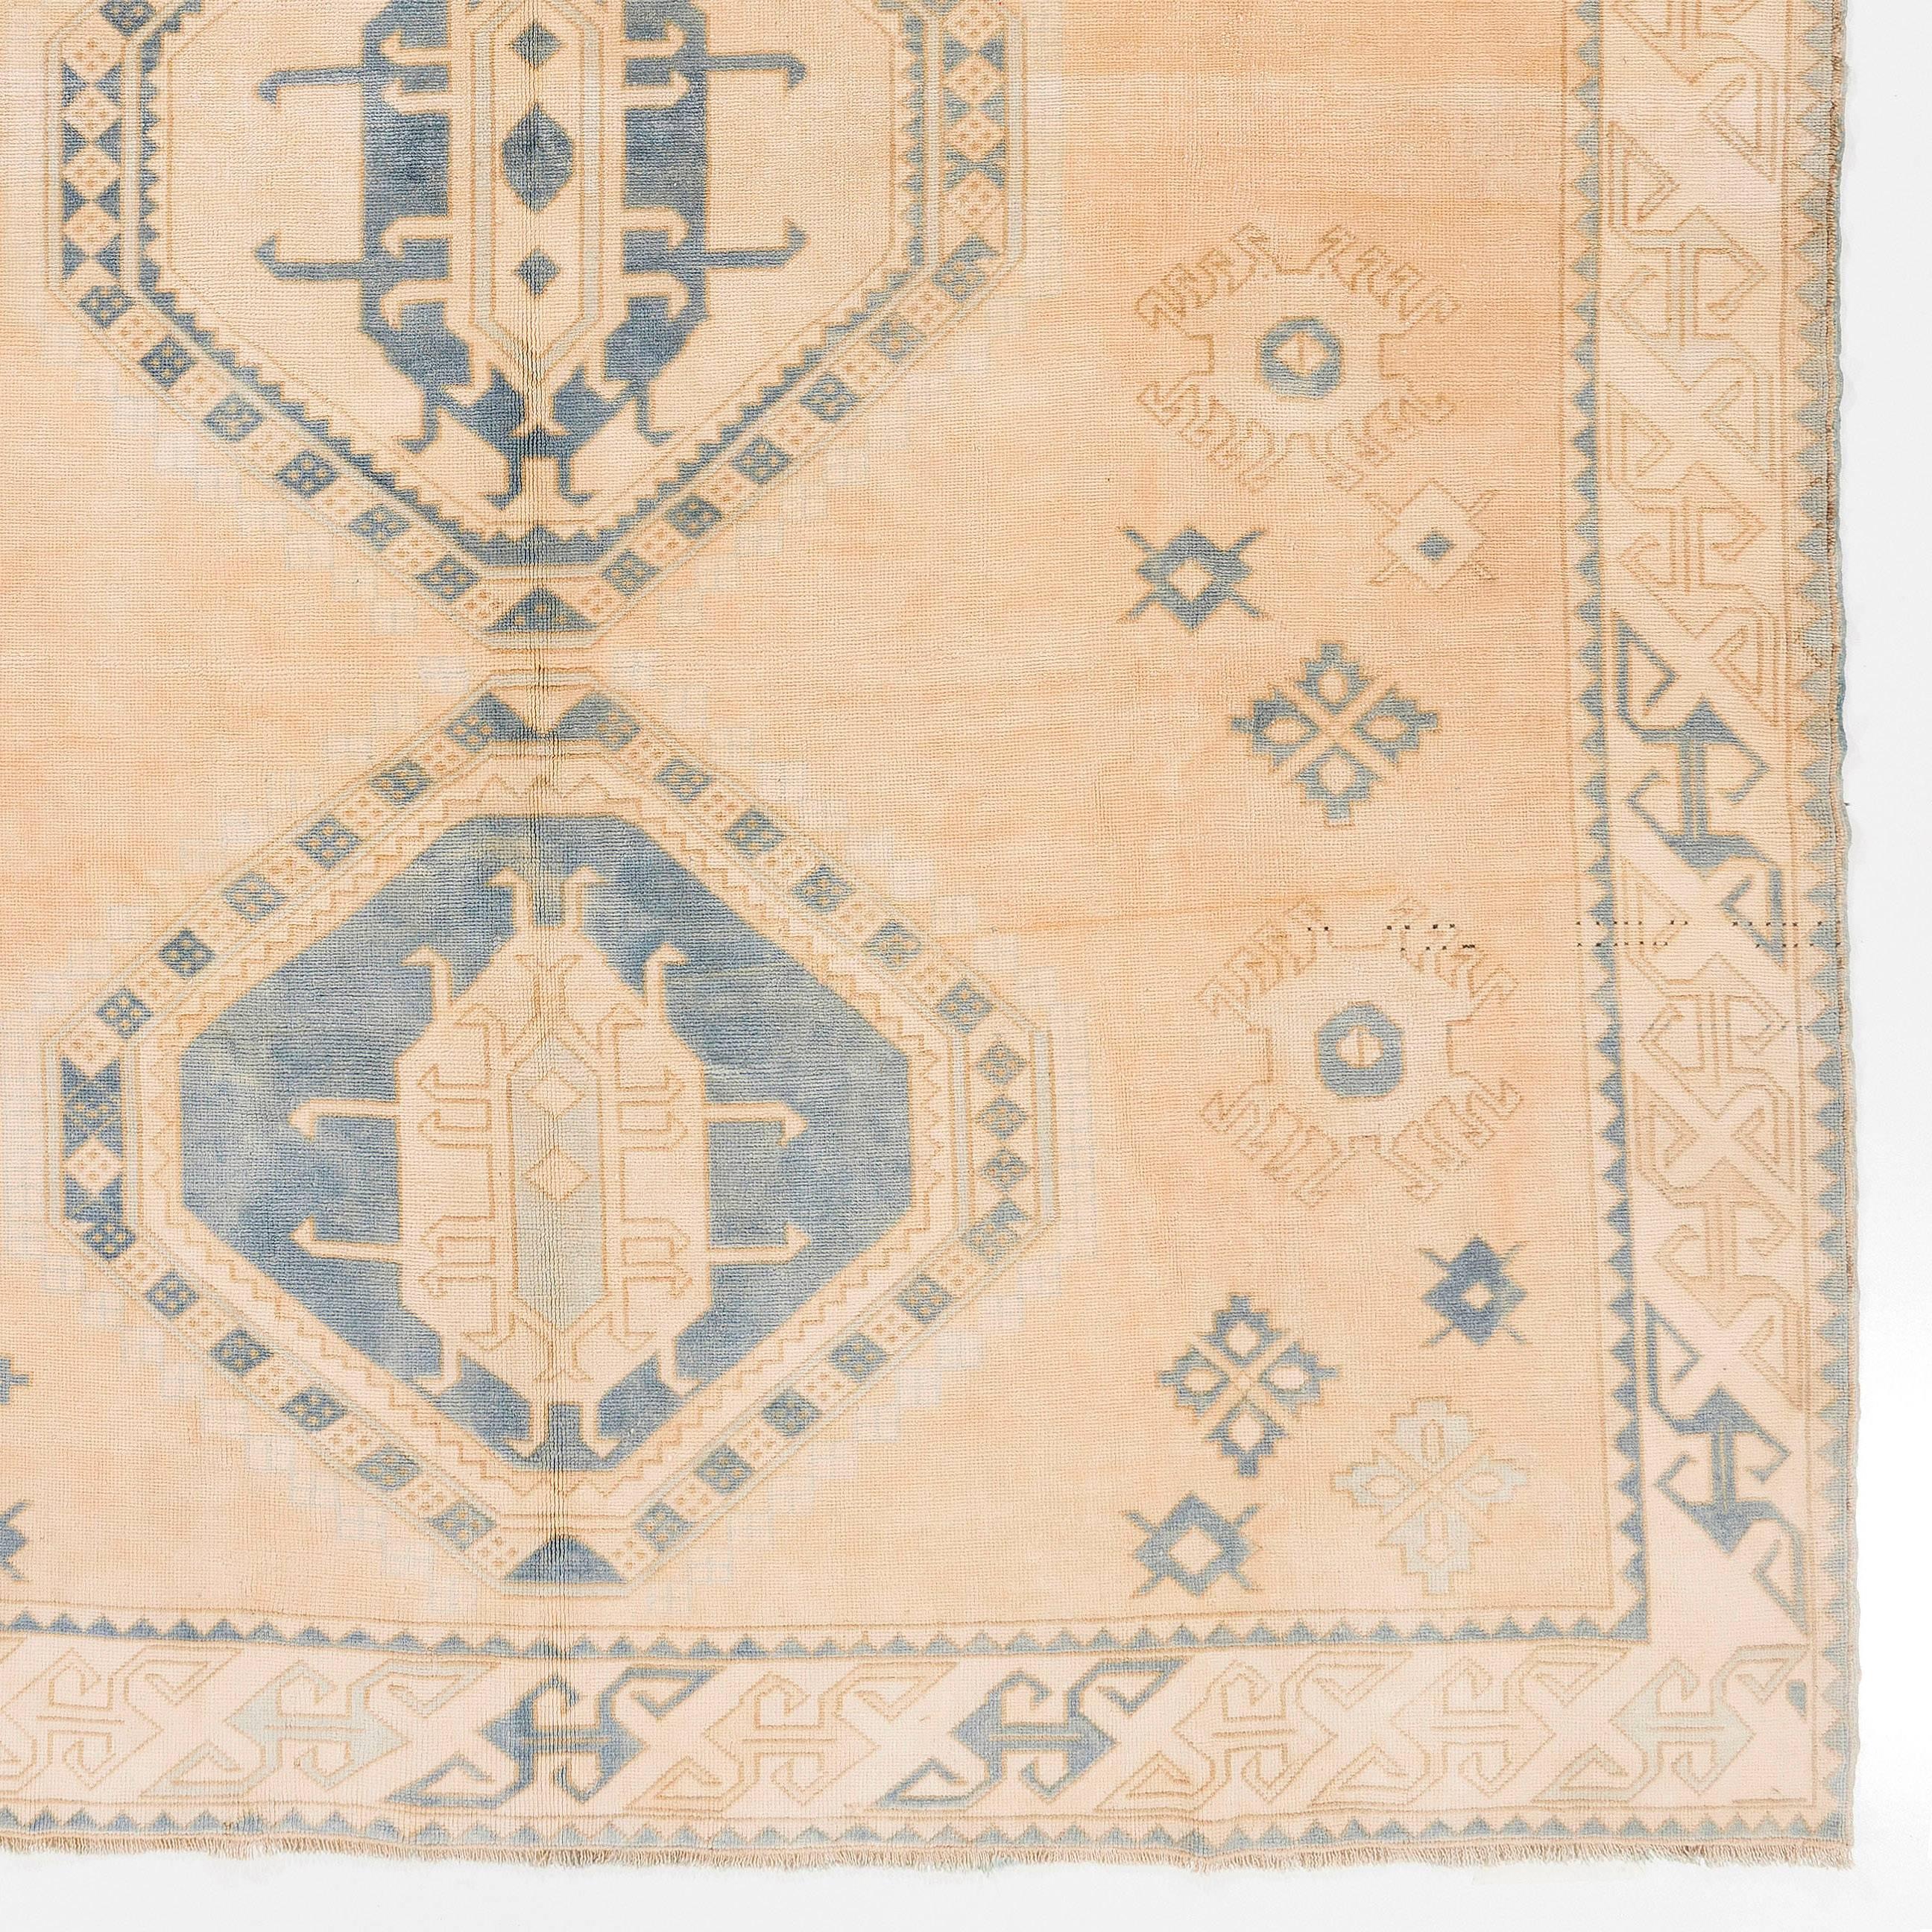 Oushak 9.7x12.6 Ft Vintage Anatolian Rug in Salmon Pink, Cream and Light Blue Colors For Sale